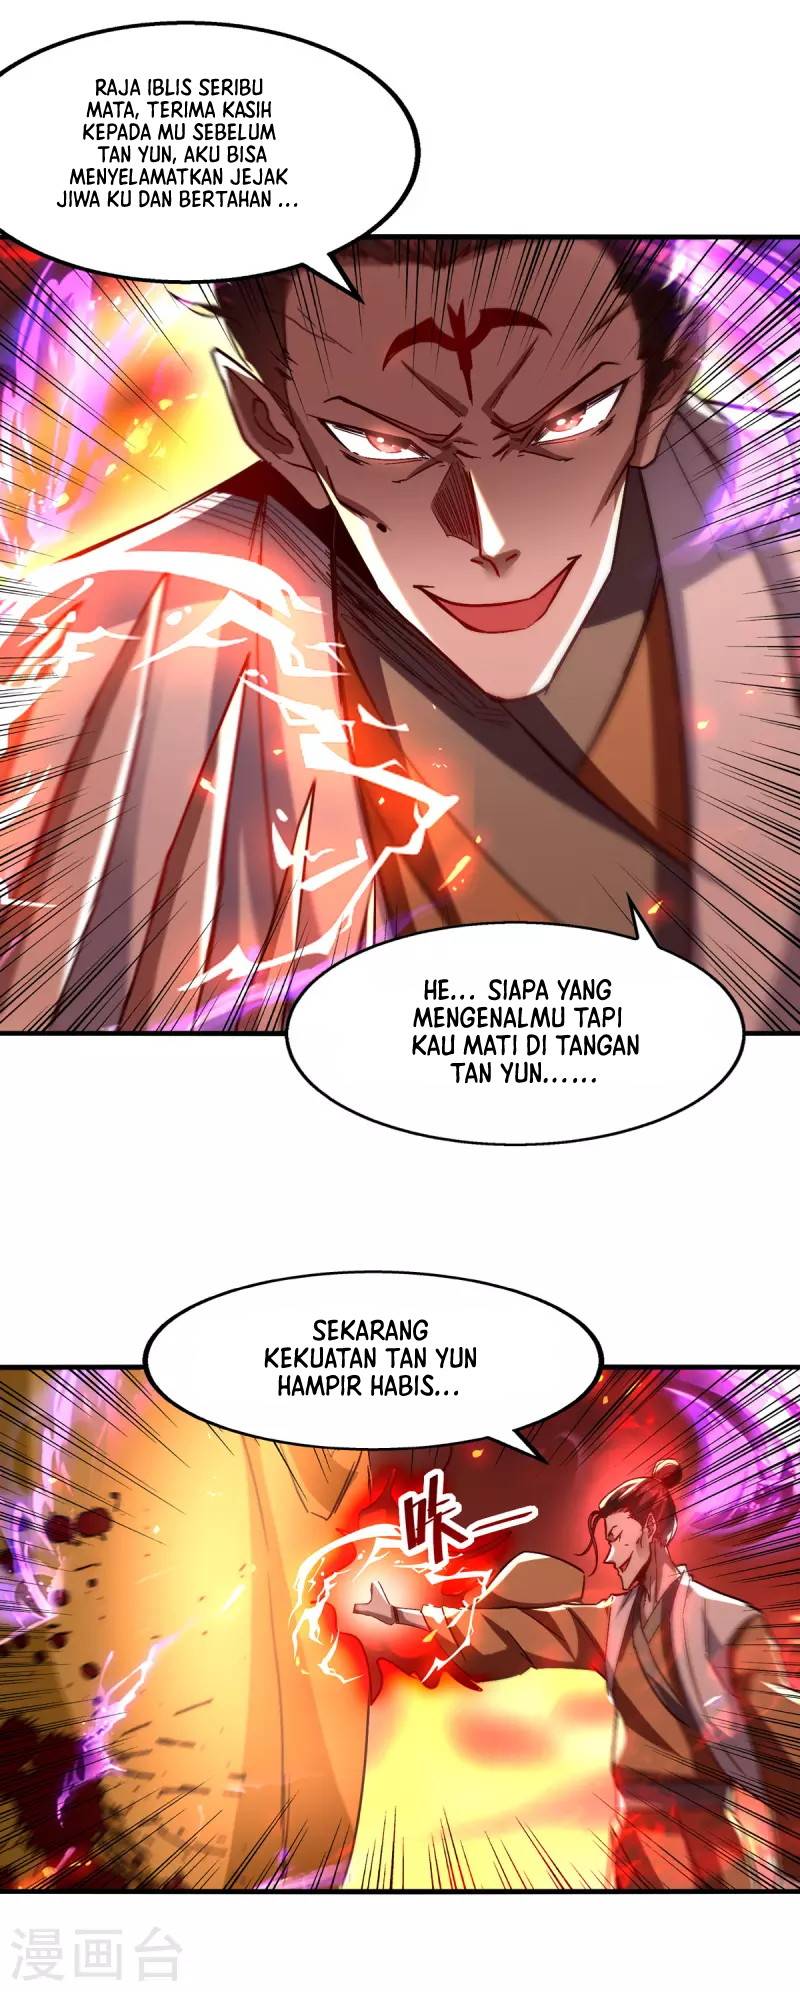 Against The Heaven Supreme (Heaven Guards) Chapter 72 - 219